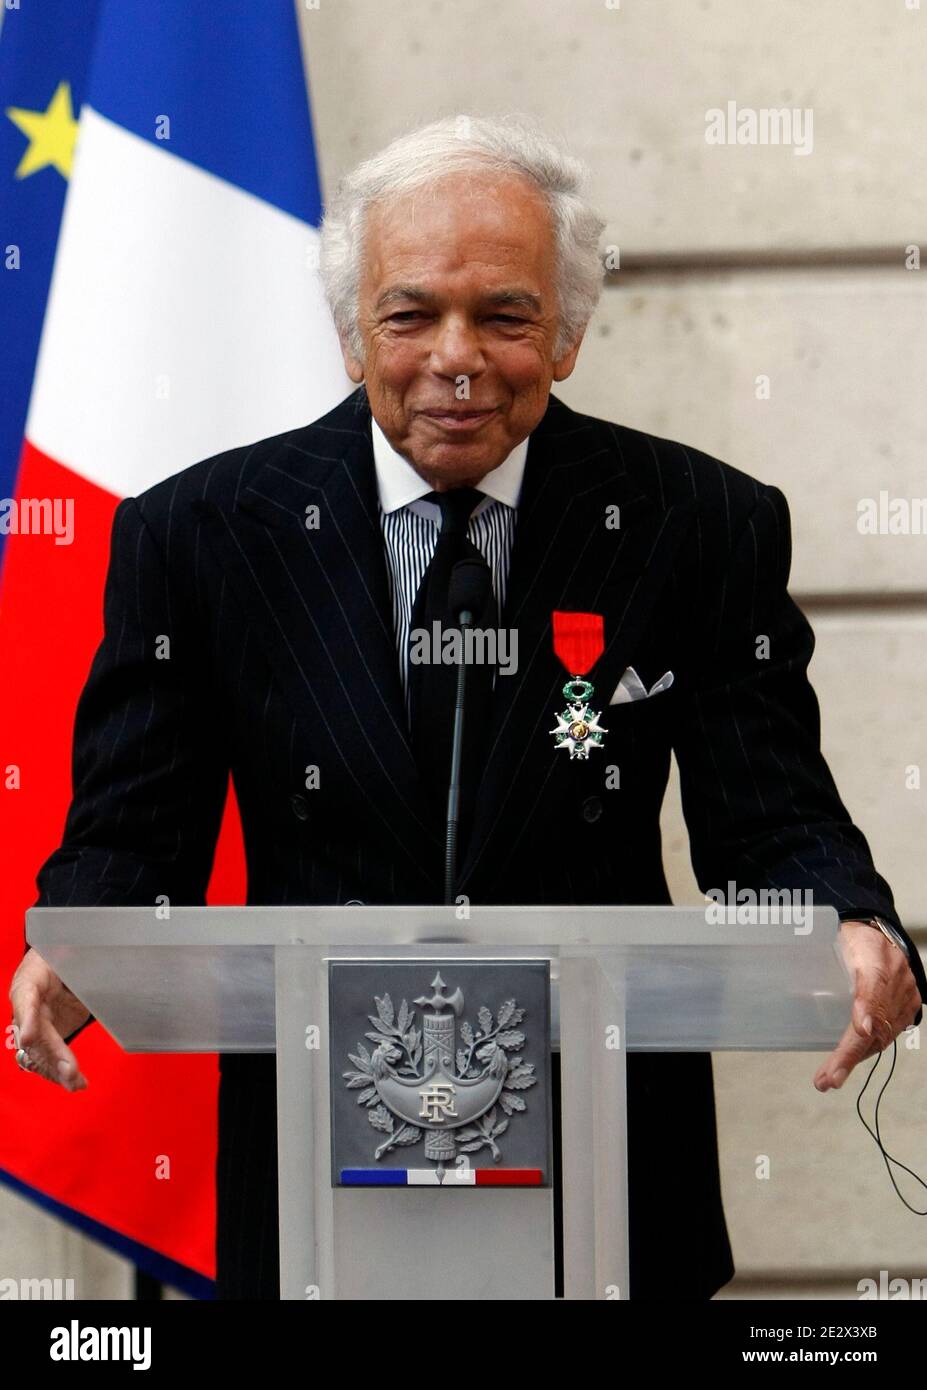 . fashion designer Ralph Lauren, left, delivers his speech after being  awarded Chevalier of the Legion of Honor, one of France's most prestigious  distinctions, by French President Nicolas Sarkozy, unseen, during a